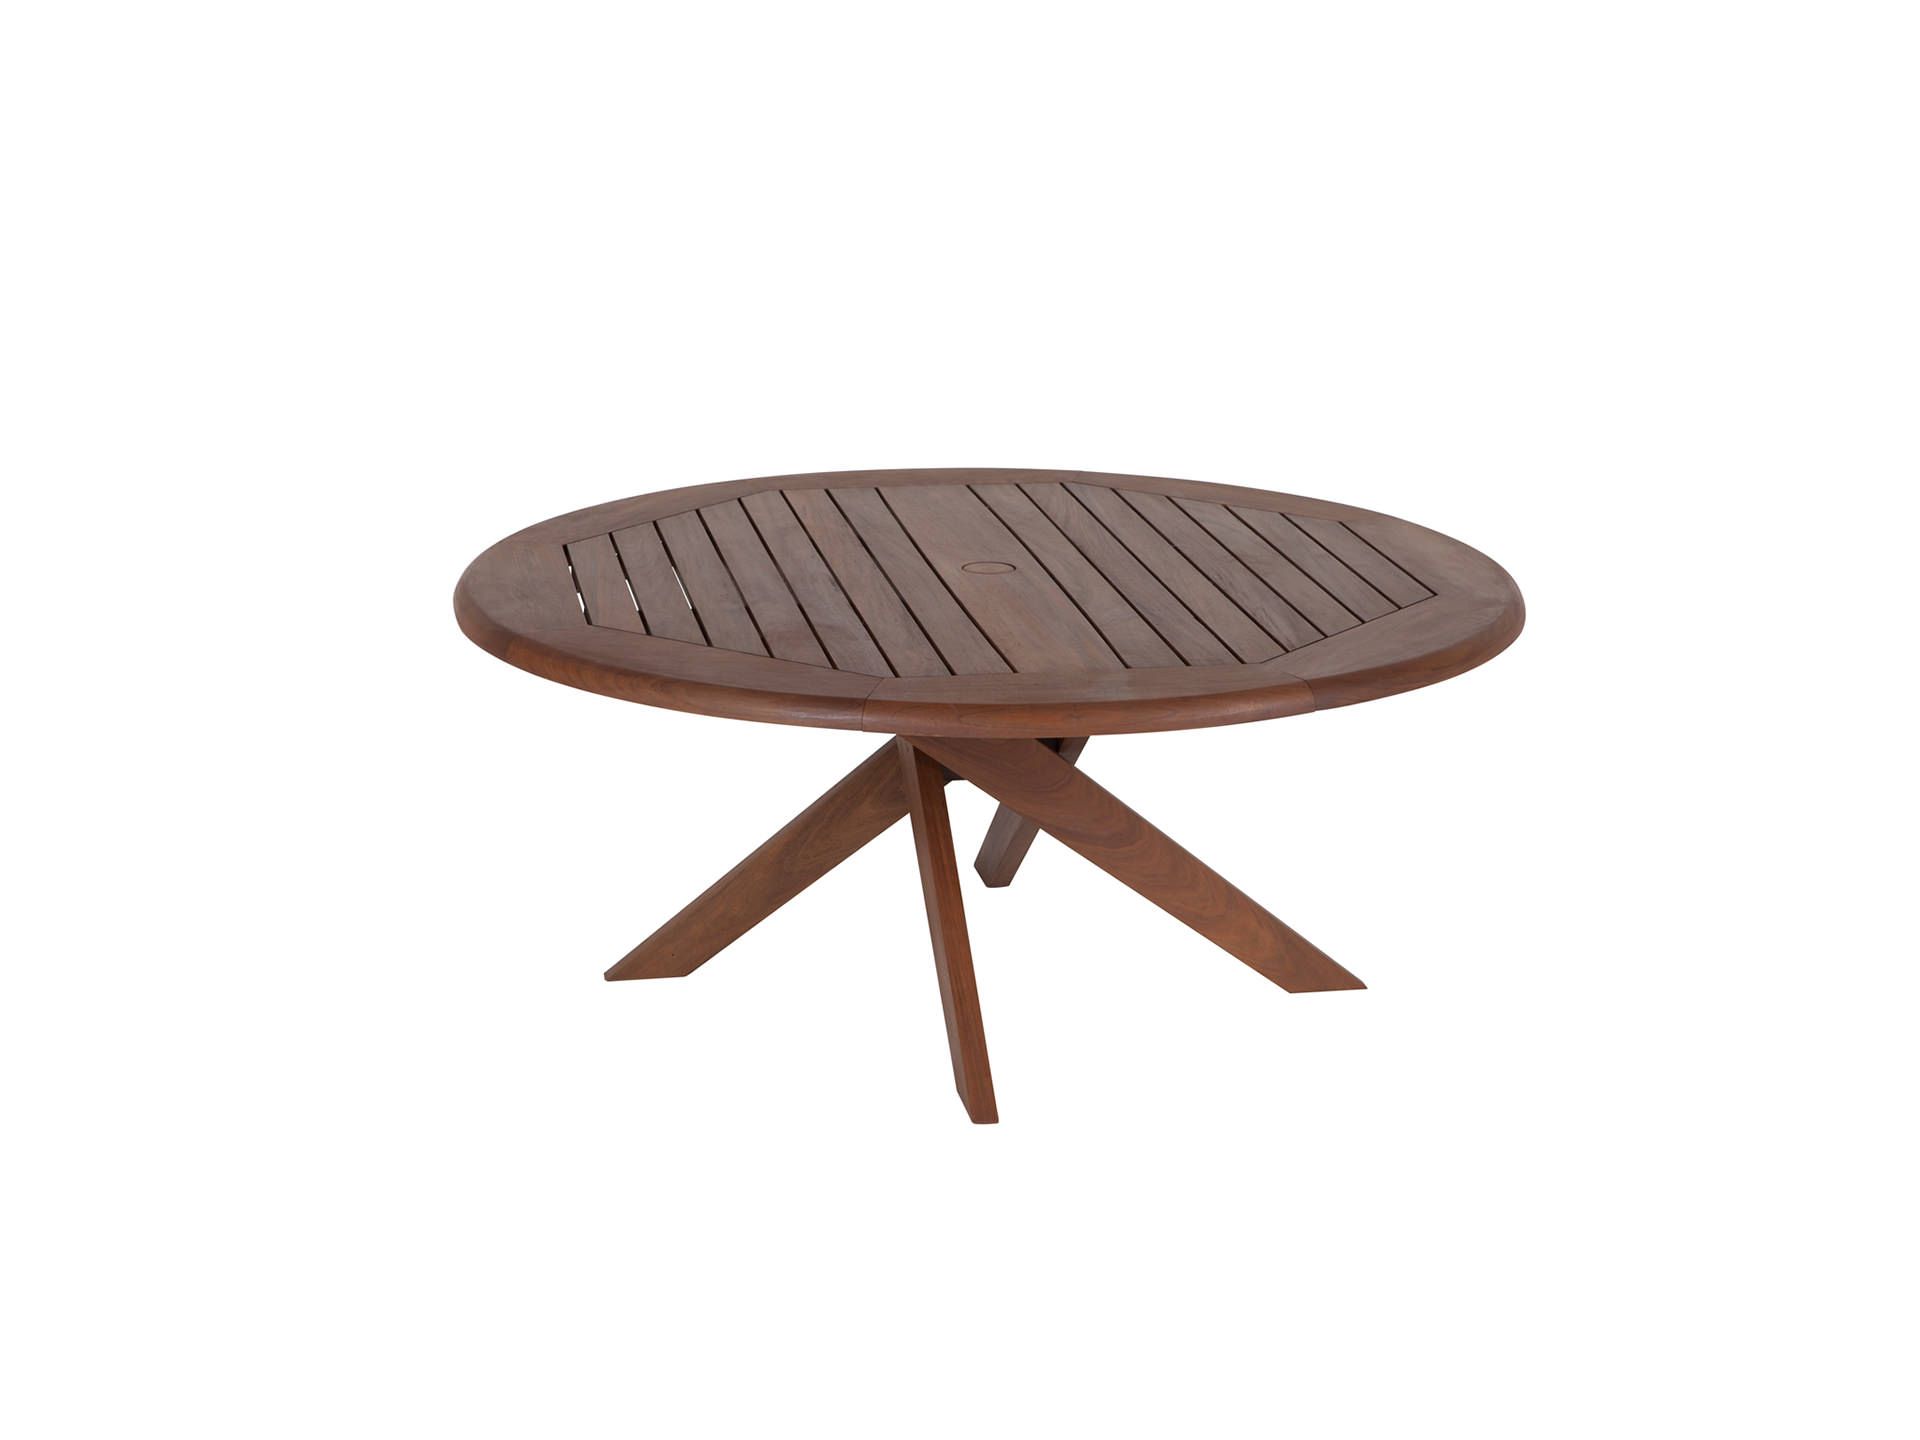 Jensen Leisure: Topaz Collection – Offenbachers For Monnatural Wood Outdoor Folding Tables (View 9 of 15)